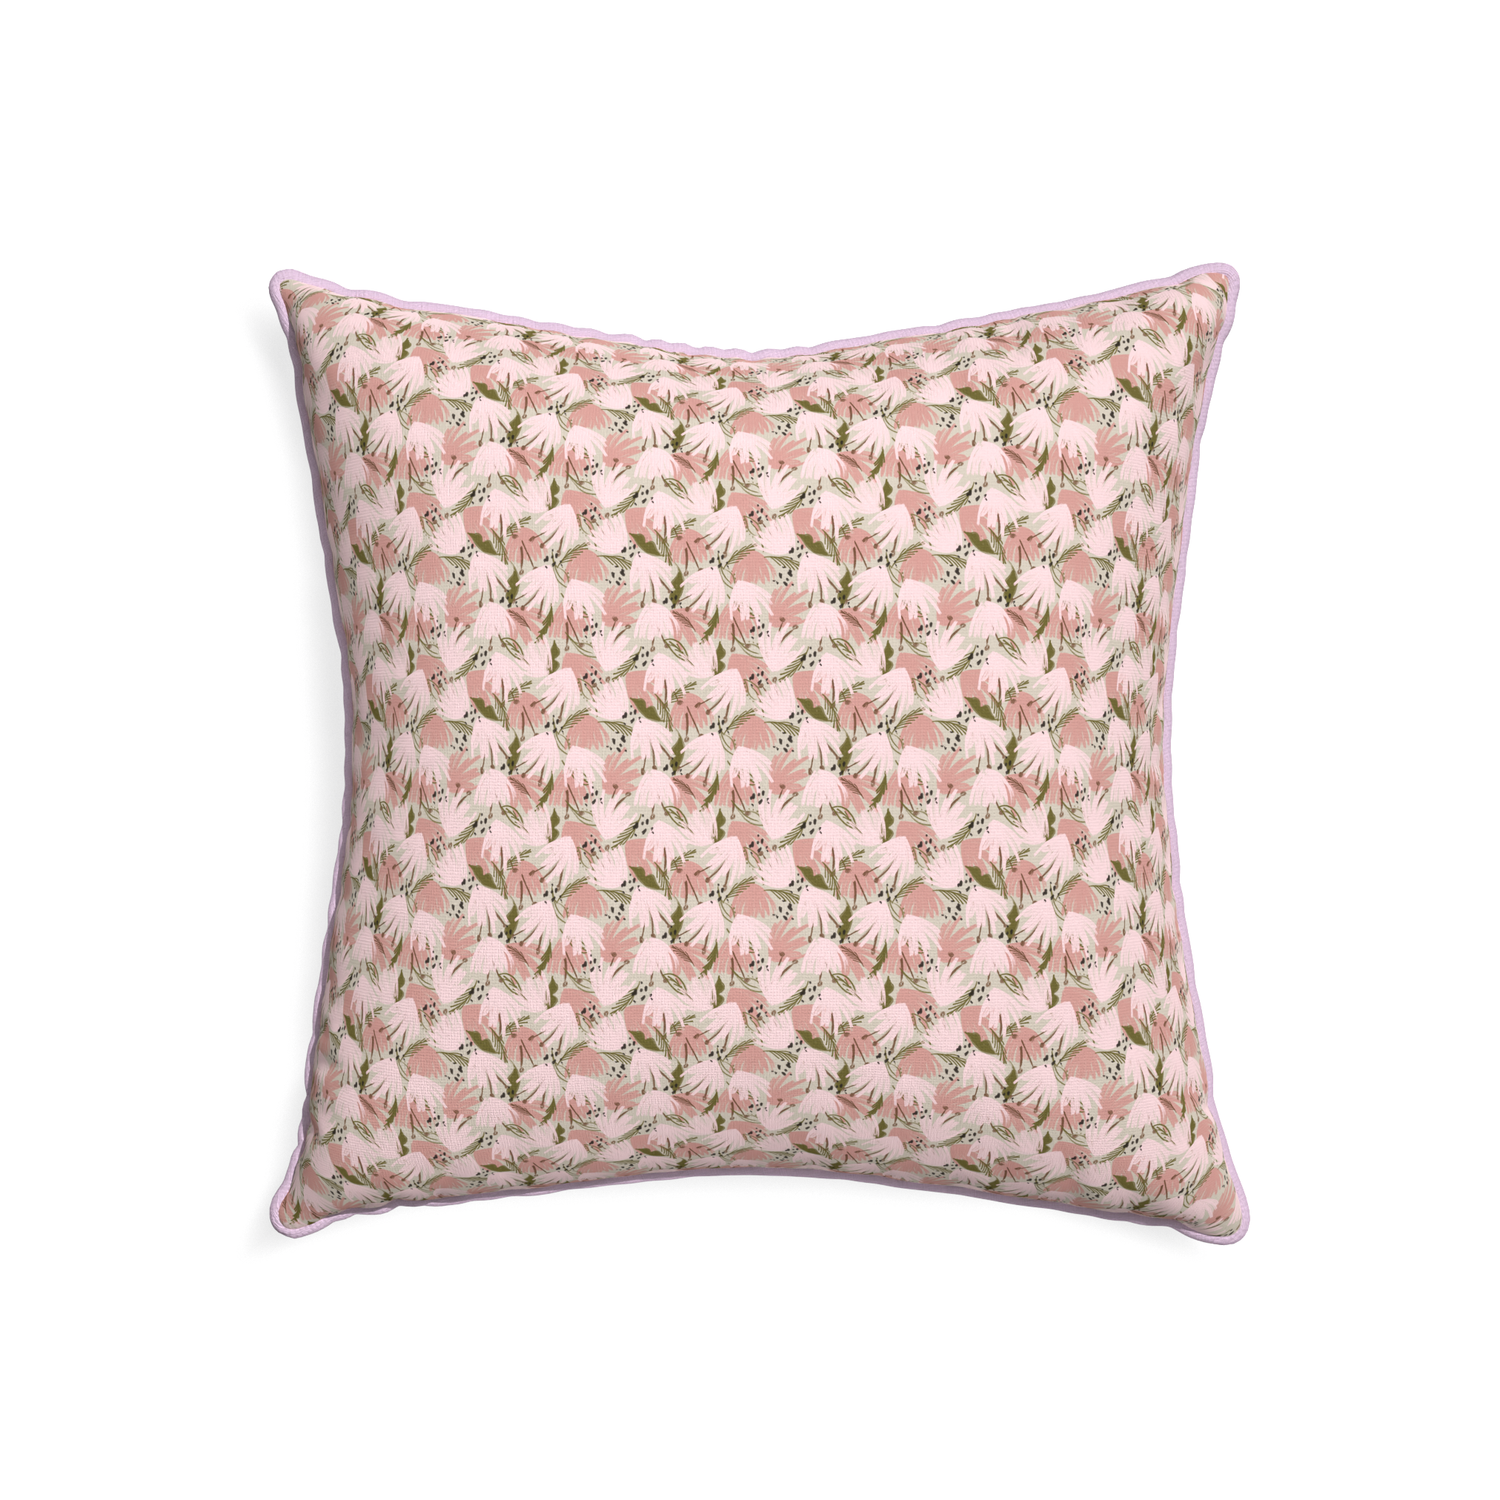 22-square eden pink custom pillow with l piping on white background